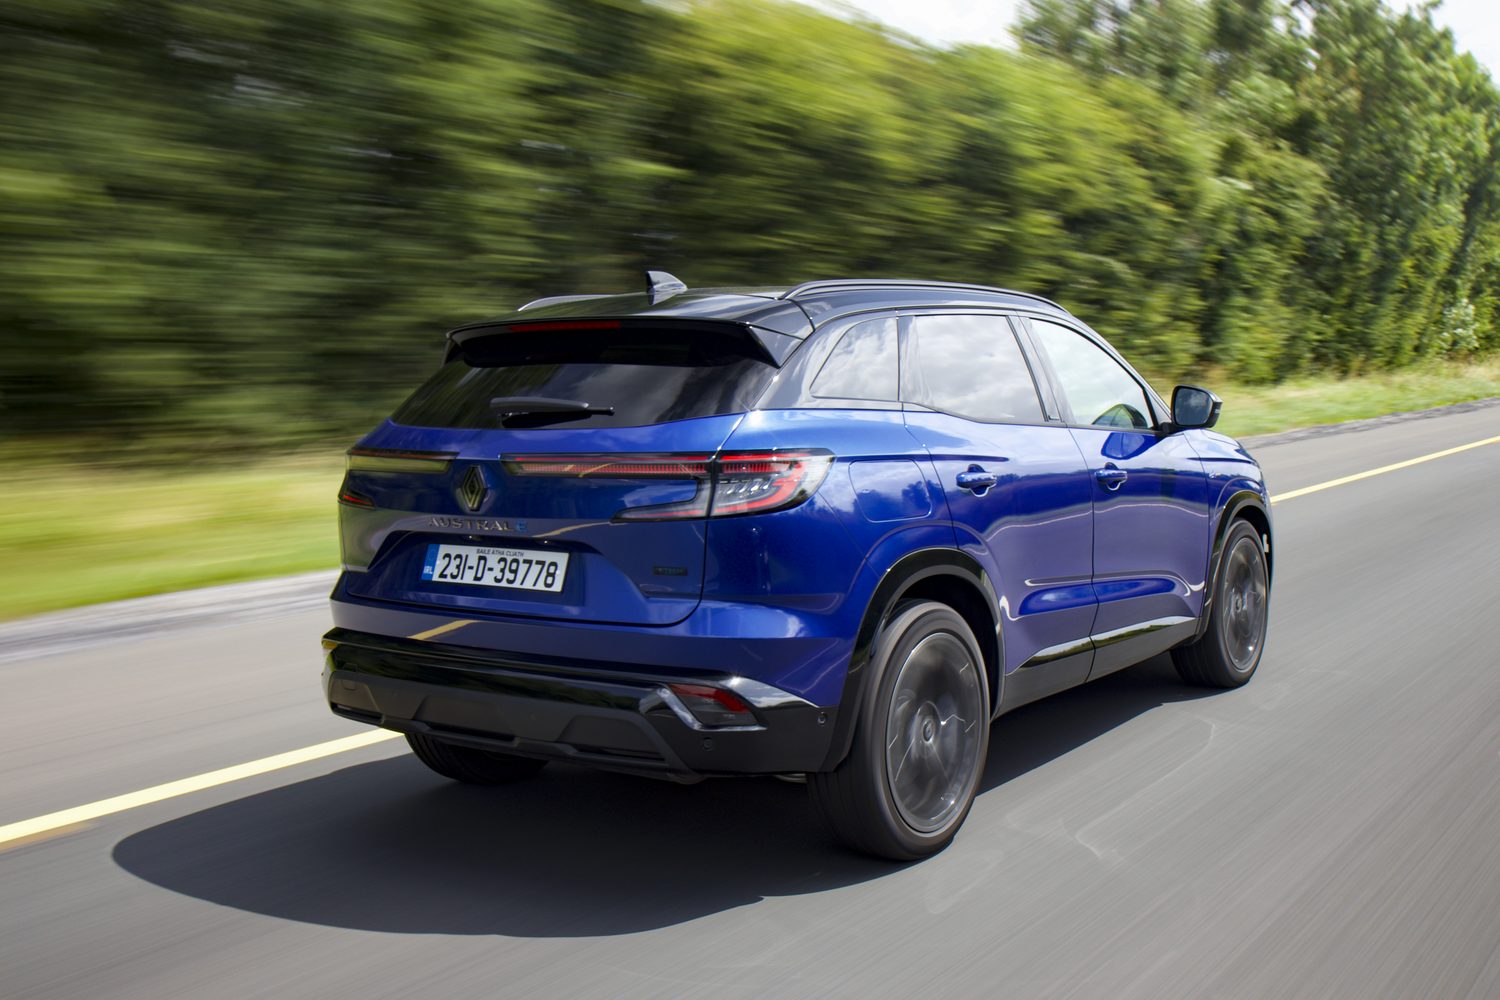 Renault Austral review (2023): Renault's hybrid finally comes of